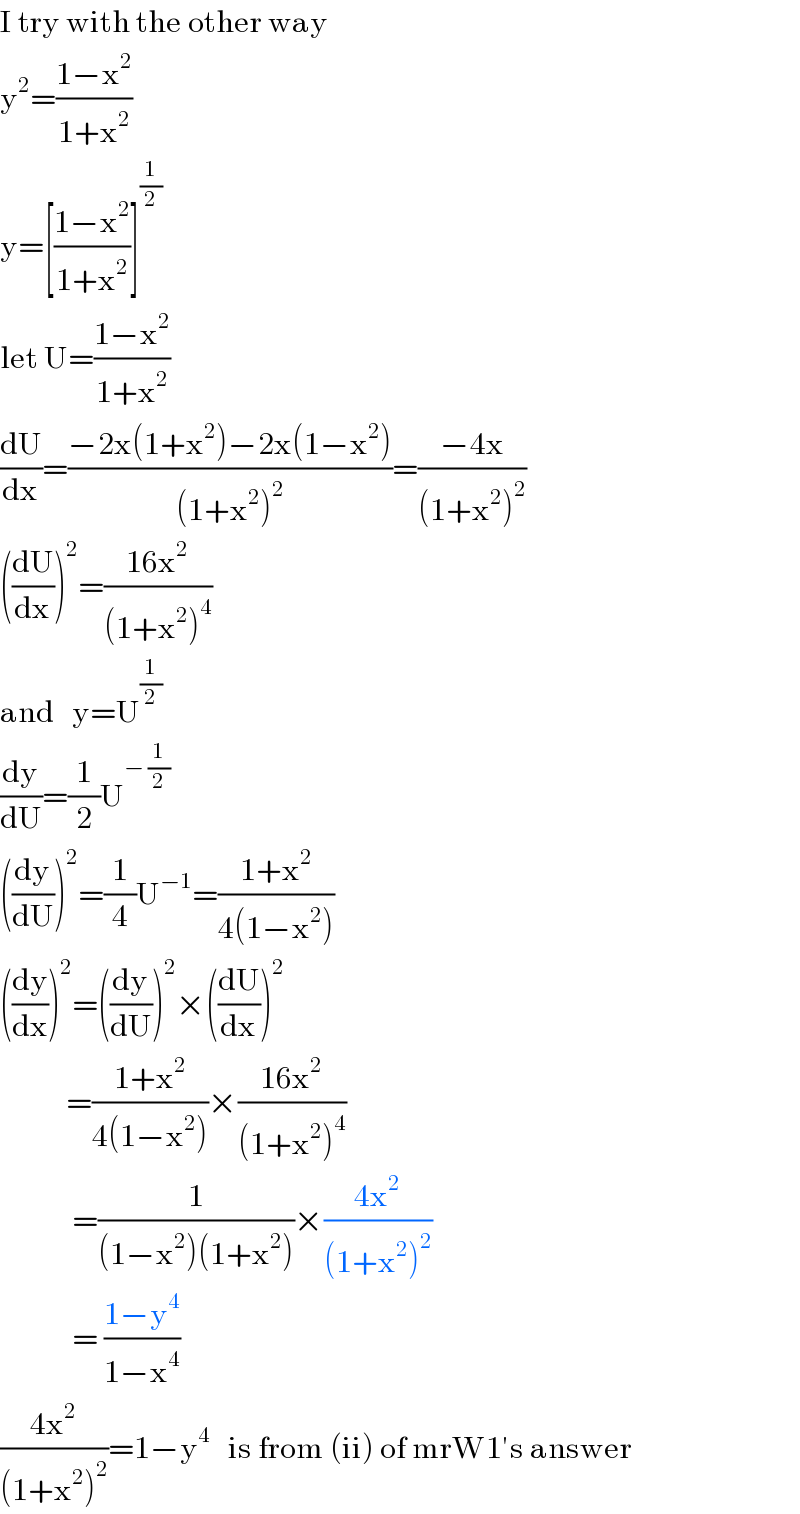 I try with the other way  y^2 =((1−x^2 )/(1+x^2 ))  y=[((1−x^2 )/(1+x^2 ))]^(1/2)   let U=((1−x^2 )/(1+x^2 ))  (dU/dx)=((−2x(1+x^2 )−2x(1−x^2 ))/((1+x^2 )^2 ))=((−4x)/((1+x^2 )^2 ))       ((dU/dx))^2 =((16x^2 )/((1+x^2 )^4 ))  and   y=U^(1/2)   (dy/dU)=(1/2)U^(− (1/2))   ((dy/dU))^2 =(1/4)U^(−1) =((1+x^2 )/(4(1−x^2 )))  ((dy/dx))^2 =((dy/dU))^2 ×((dU/dx))^2              =((1+x^2 )/(4(1−x^2 )))×((16x^2 )/((1+x^2 )^4 ))              =(1/((1−x^2 )(1+x^2 )))×((4x^2 )/((1+x^2 )^2 ))              = ((1−y^4 )/(1−x^4 ))  ((4x^2 )/((1+x^2 )^2 ))=1−y^4    is from (ii) of mrW1′s answer       